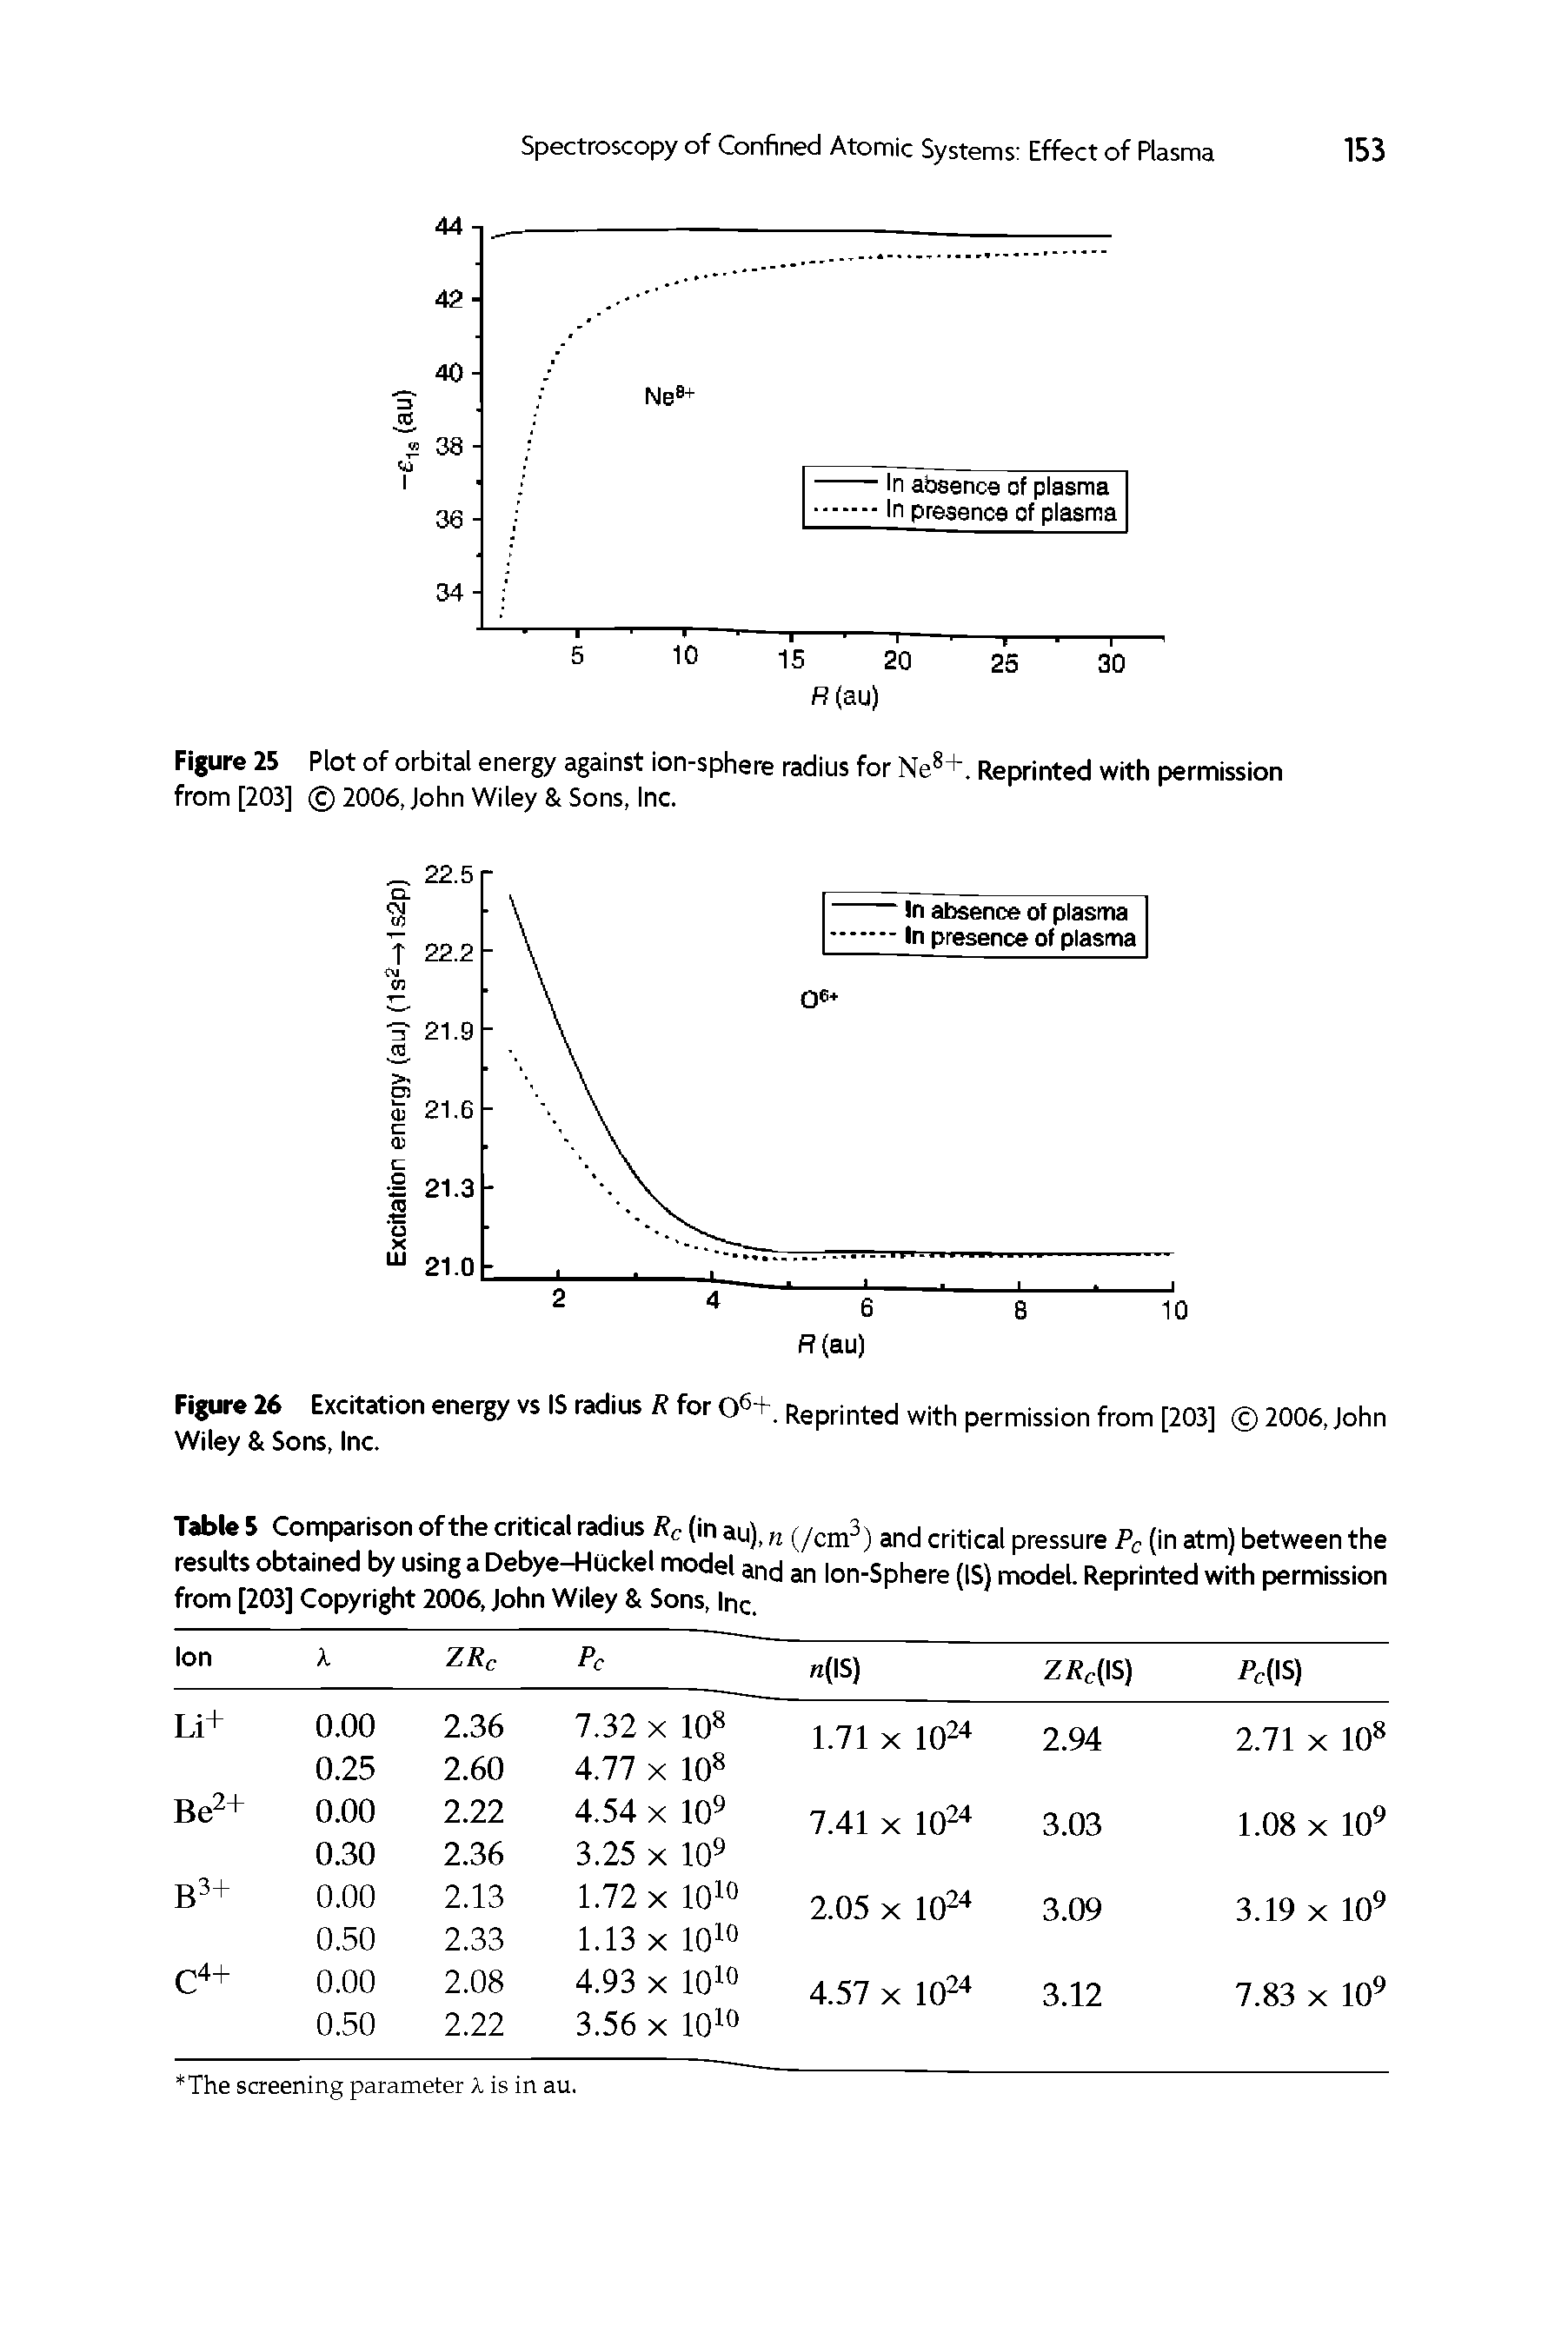 Table 5 Comparison of the critical radius Rc (in au), n (/cm3) and critical pressure Pc (in atm) between the results obtained by using a Debye-Huckel model and an Ion-Sphere (IS) model. Reprinted with permission from [203] Copyright 2006, John Wiley Sons, Inc.